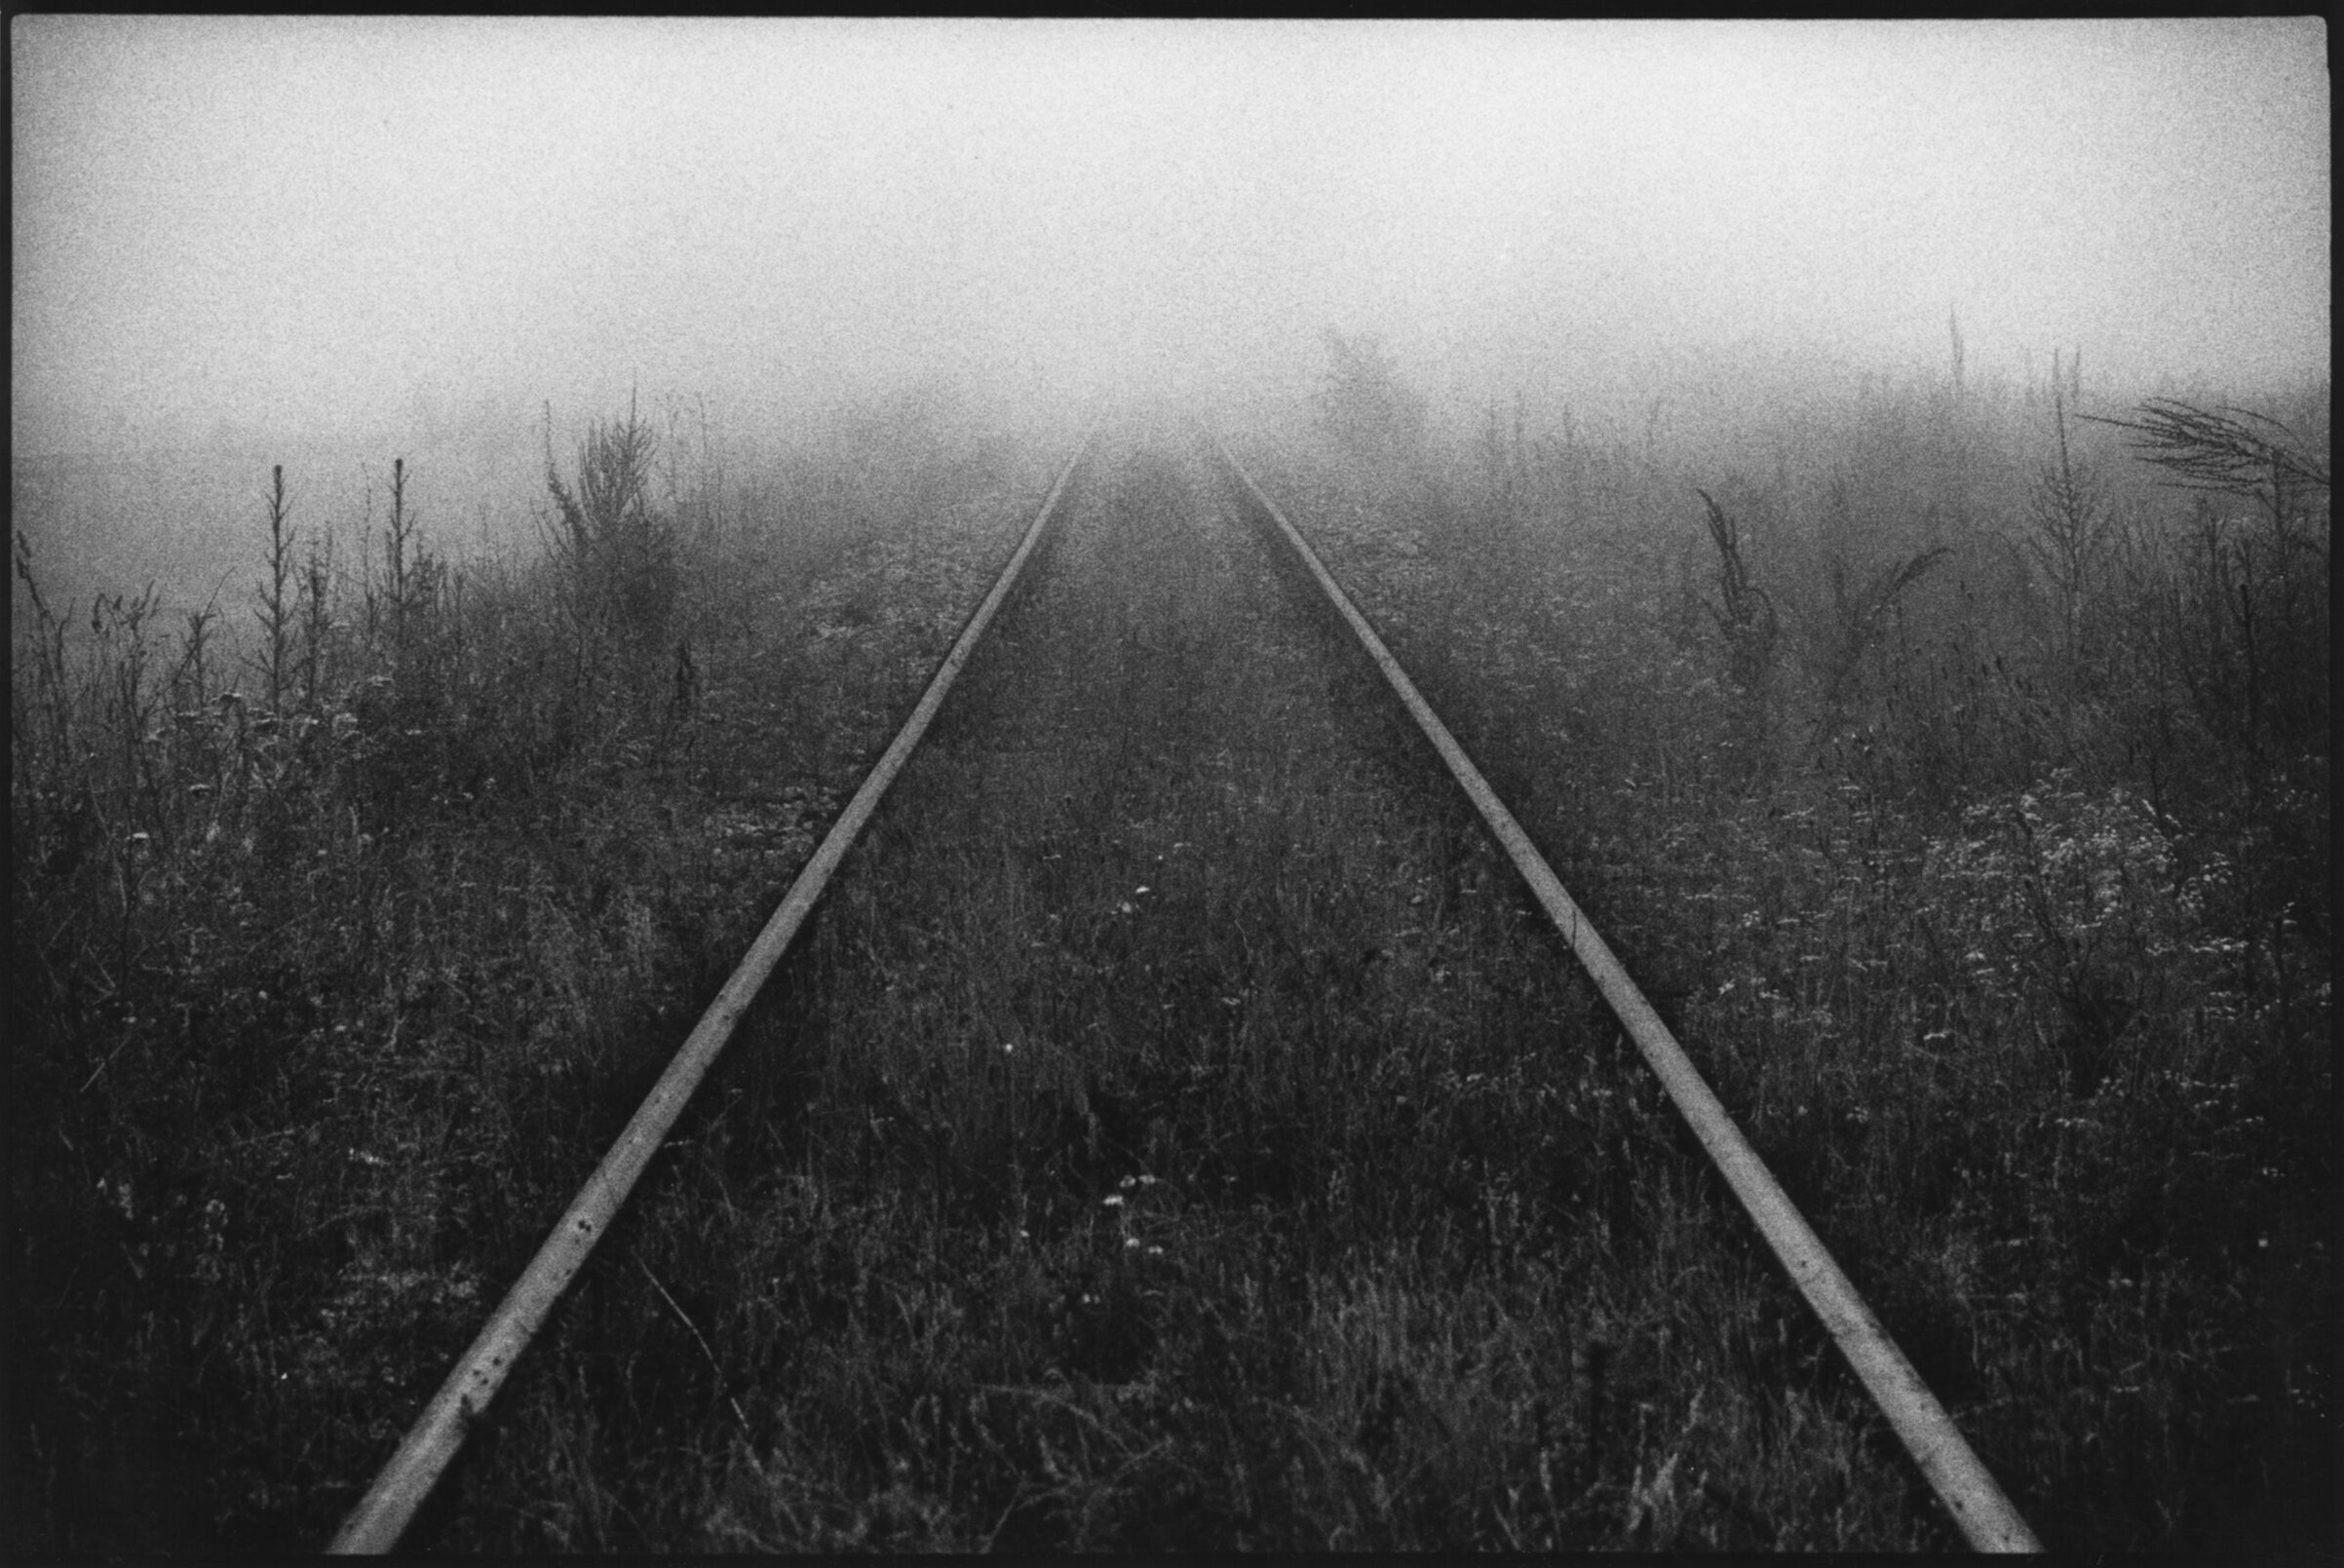  Railway track in Kosovo down which ethnic Albanian Kosovars were deported to Albania by Federal Republic of Yugoslavia authorities. 